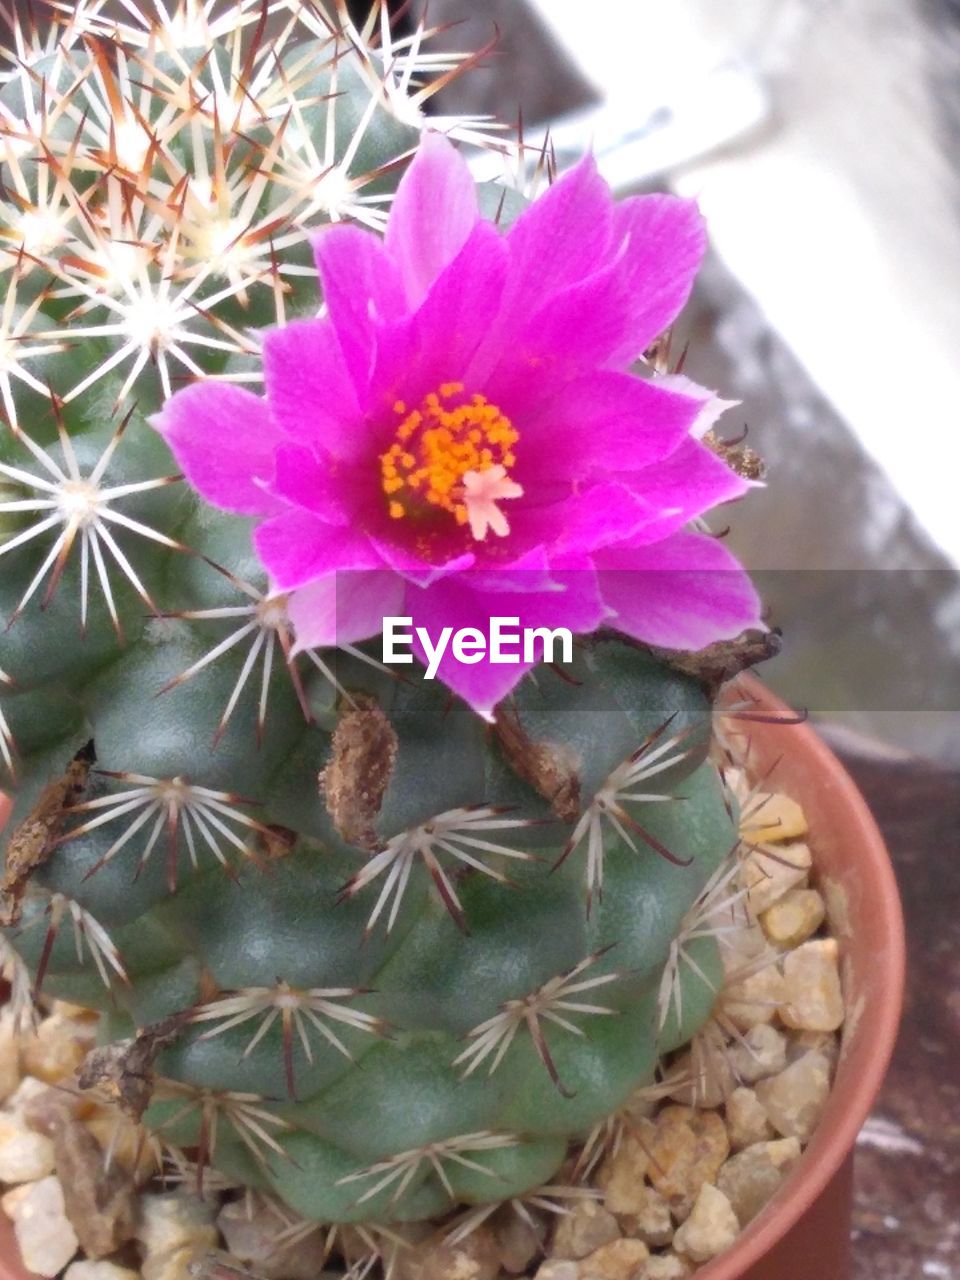 HIGH ANGLE VIEW OF PINK CACTUS FLOWER